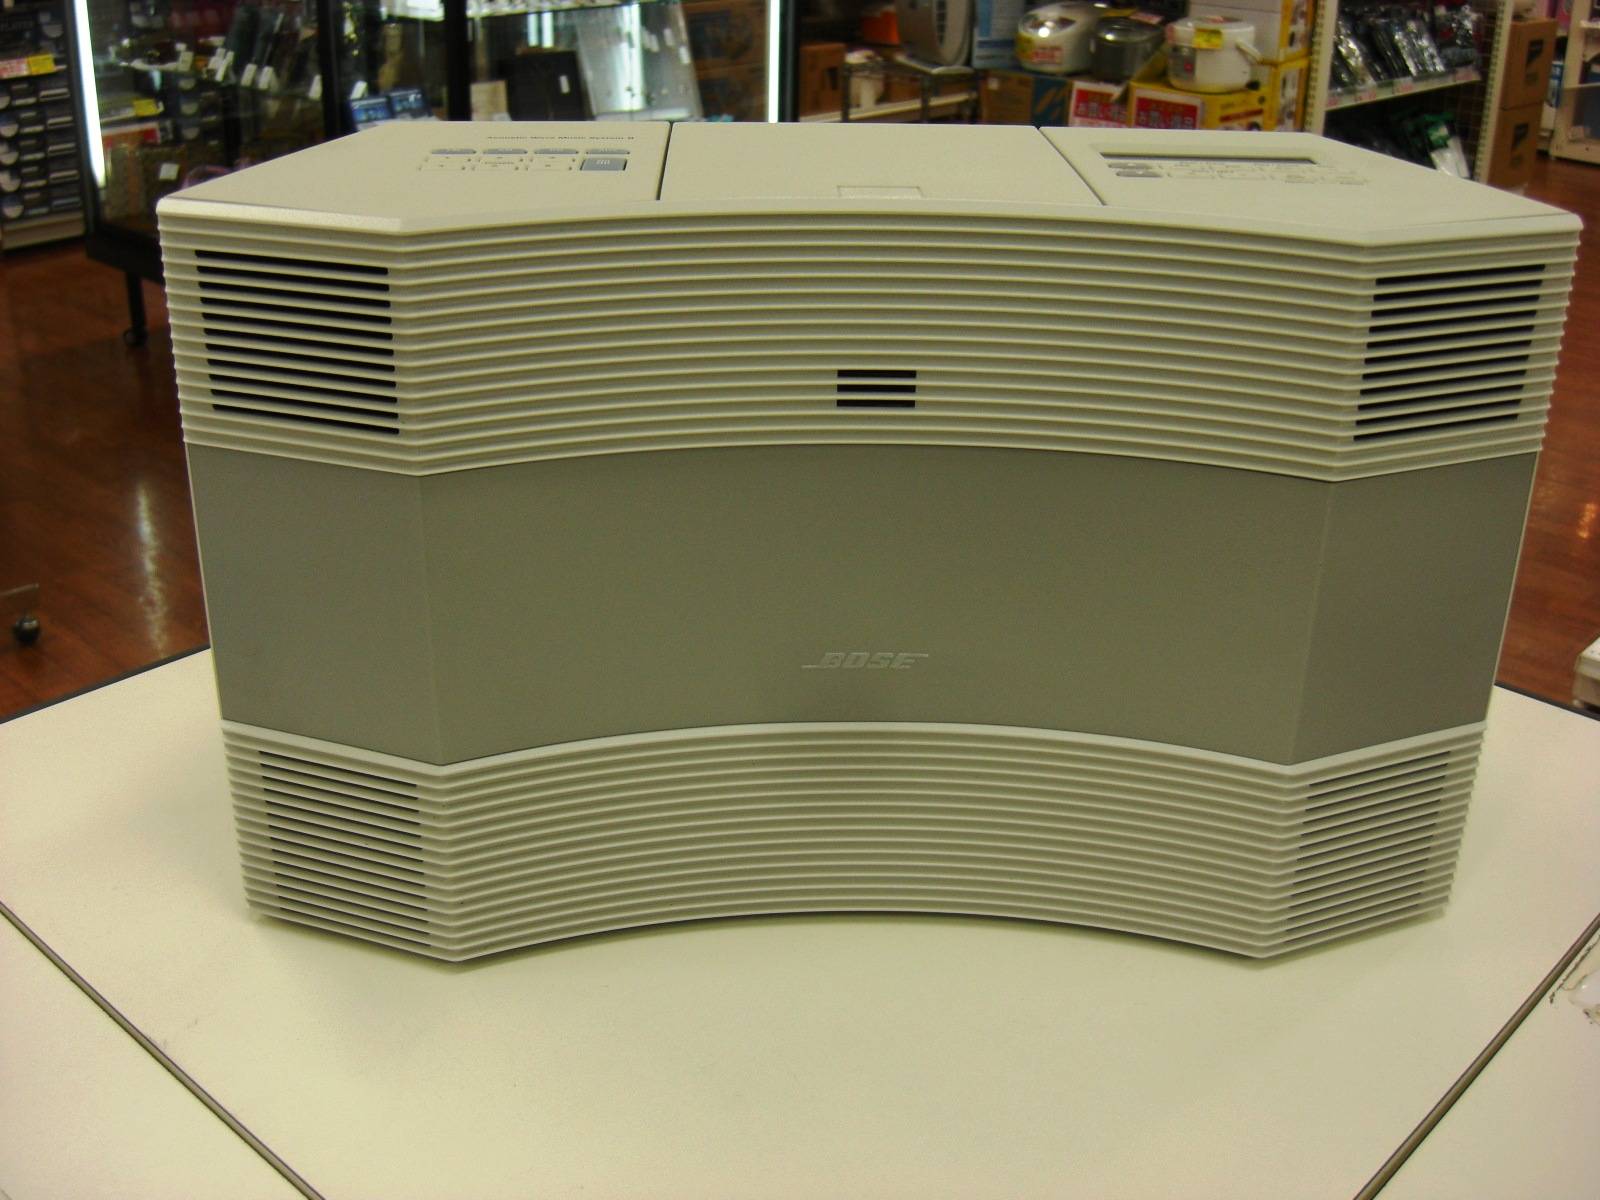 BOSE（ﾎﾞｰｽﾞ）のAcoustic Wave® music system IIを入荷しました 